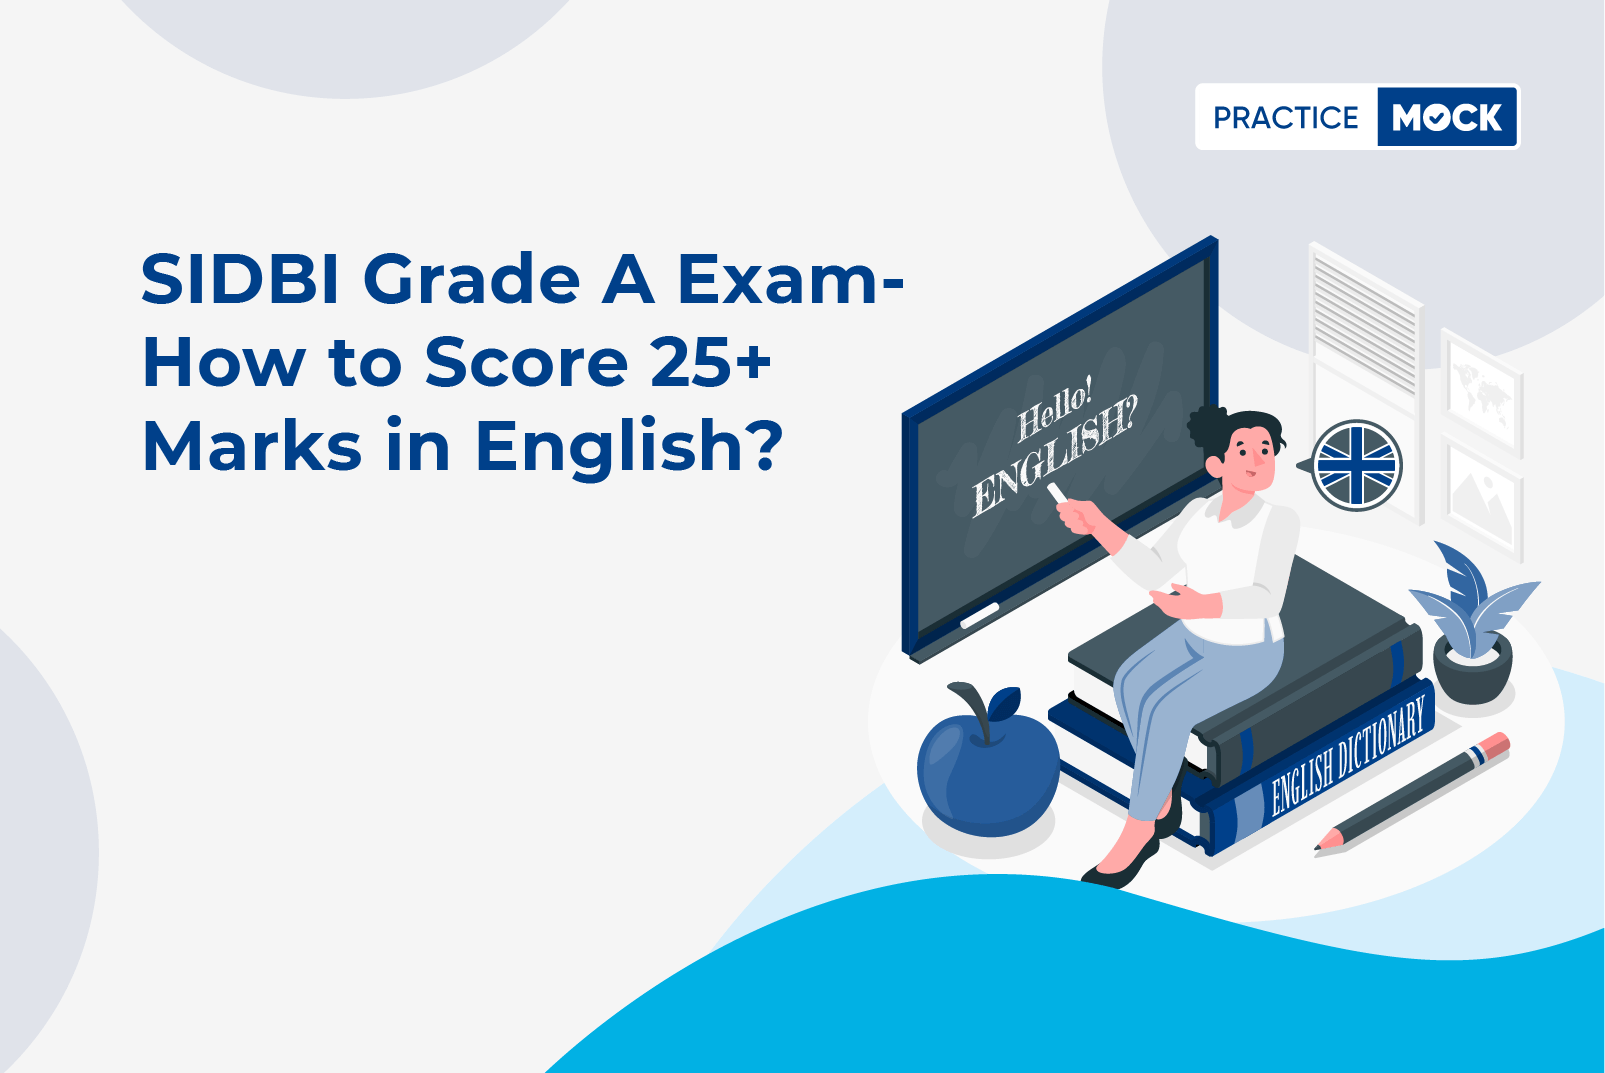 SIDBI Grade A Exam-How to score 25+ Marks in English?